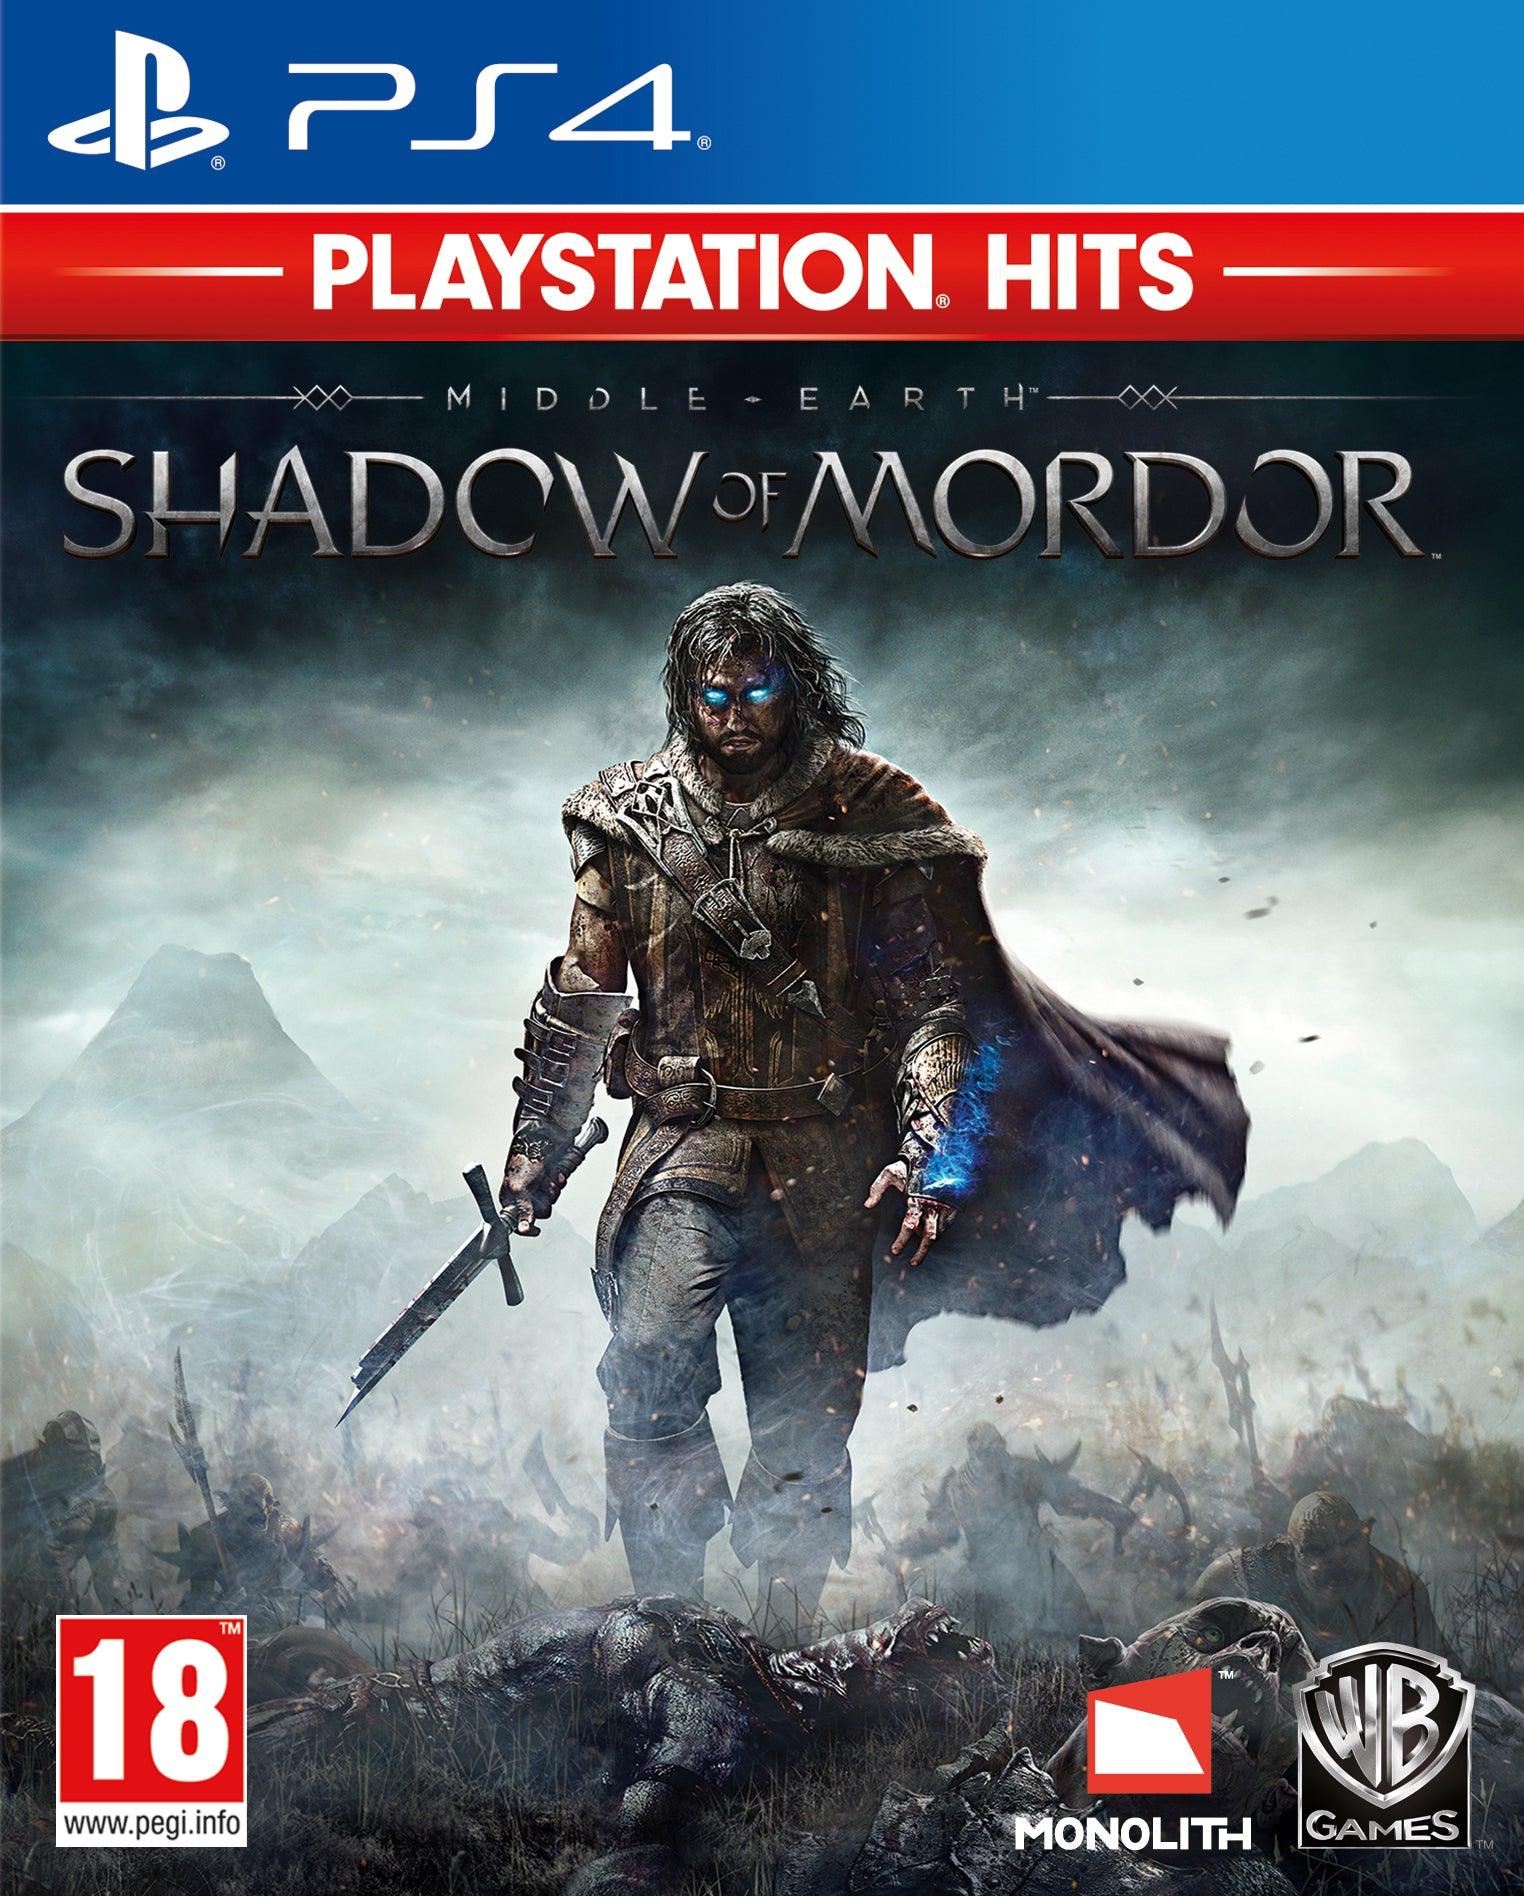 Playstation Hits Shadow Of Mordor - Want a New Gadget